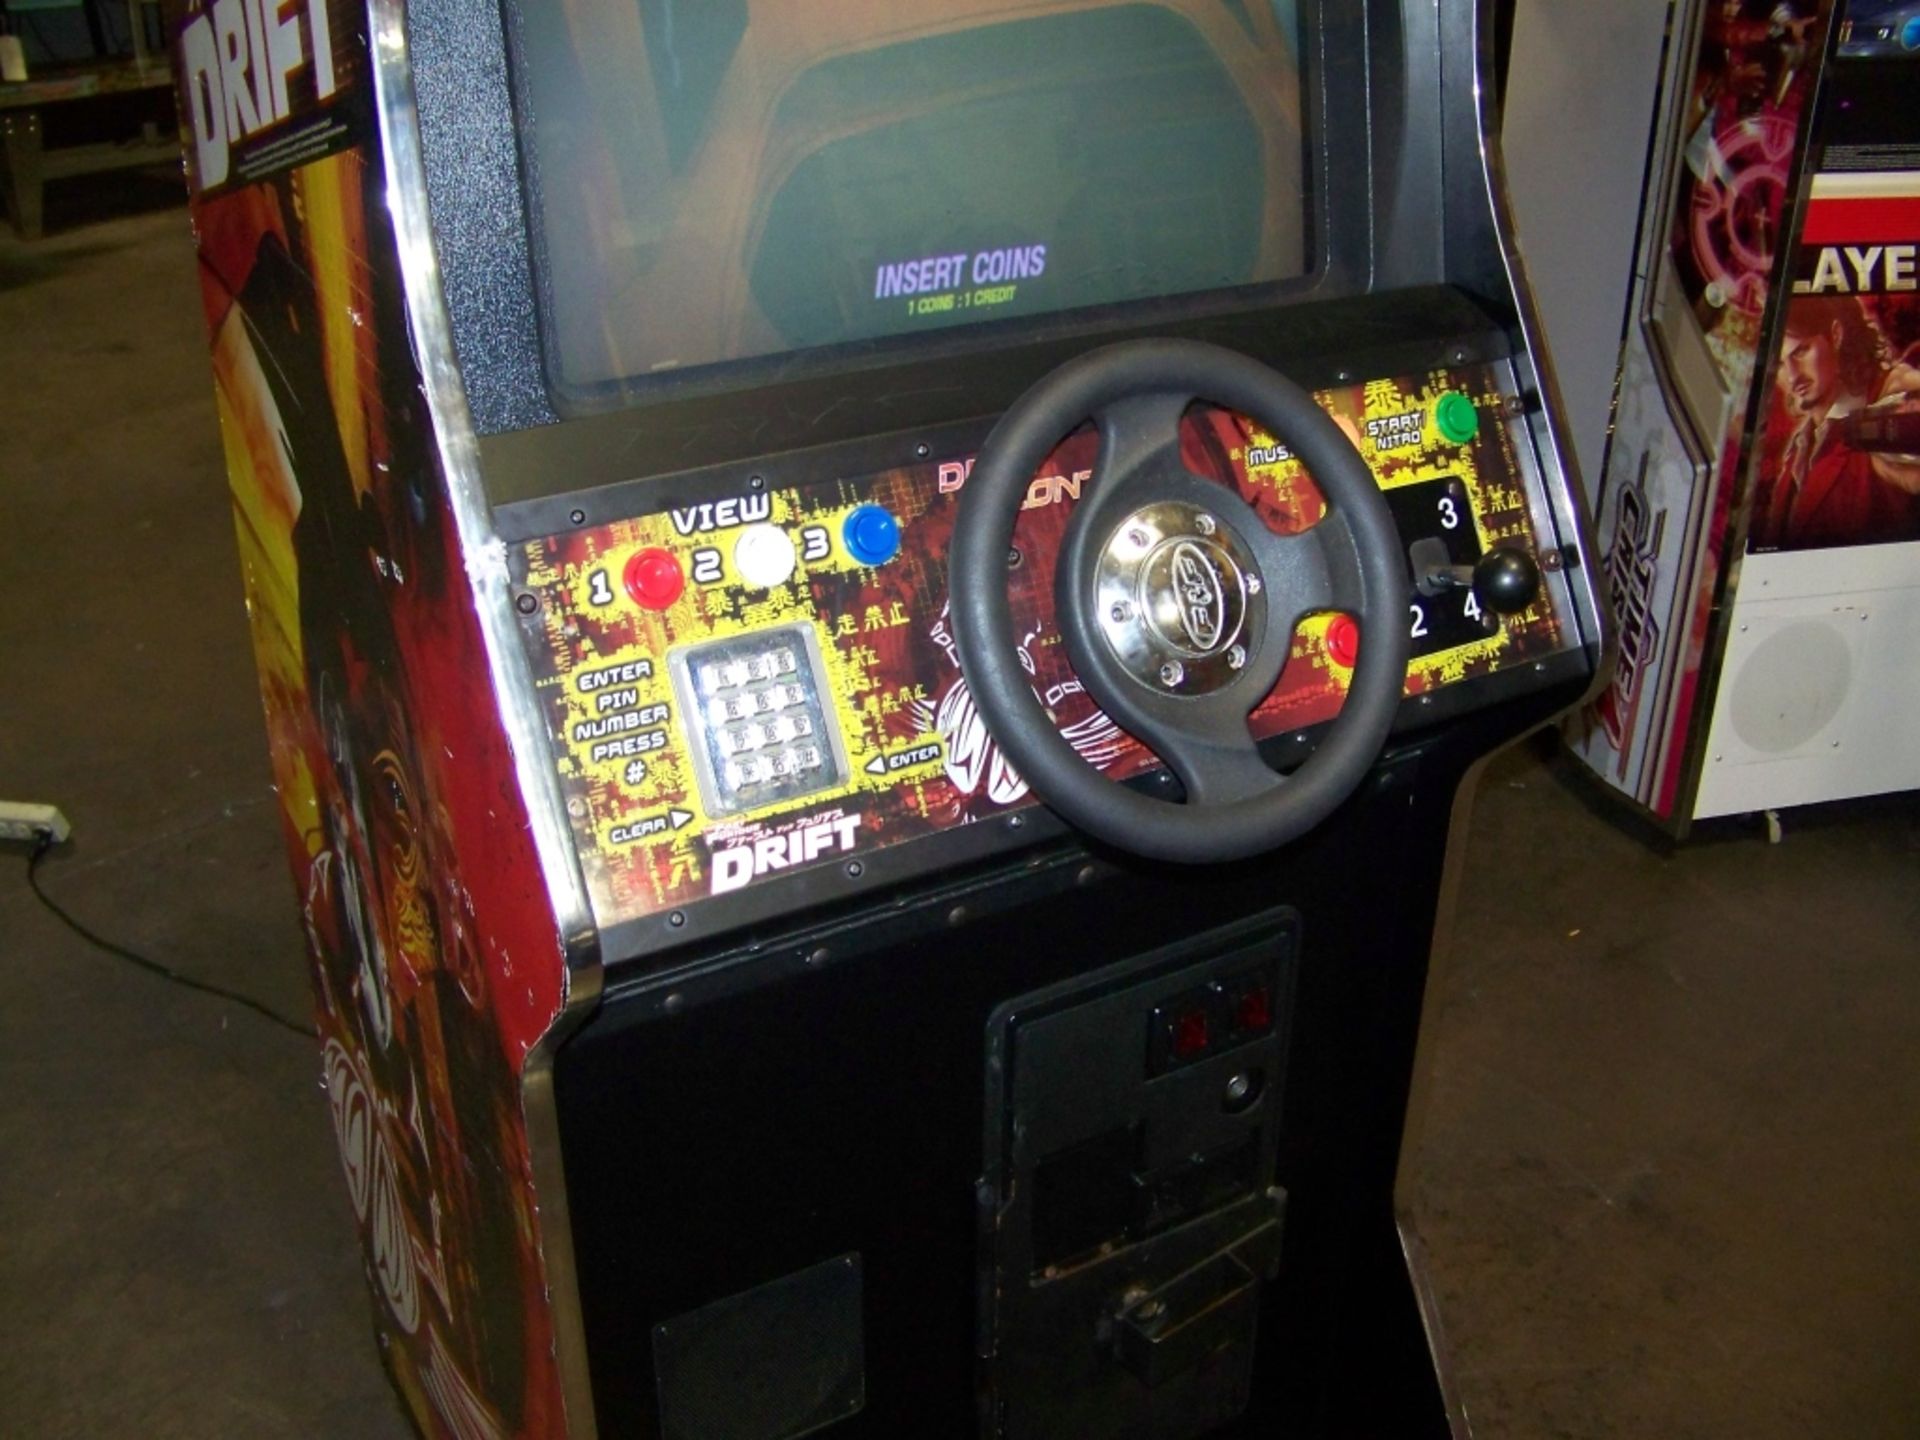 DRIFT FAST & FURIOUS UPRIGHT RACING ARCADE GAME Item is in used condition. Evidence of wear and - Image 3 of 5